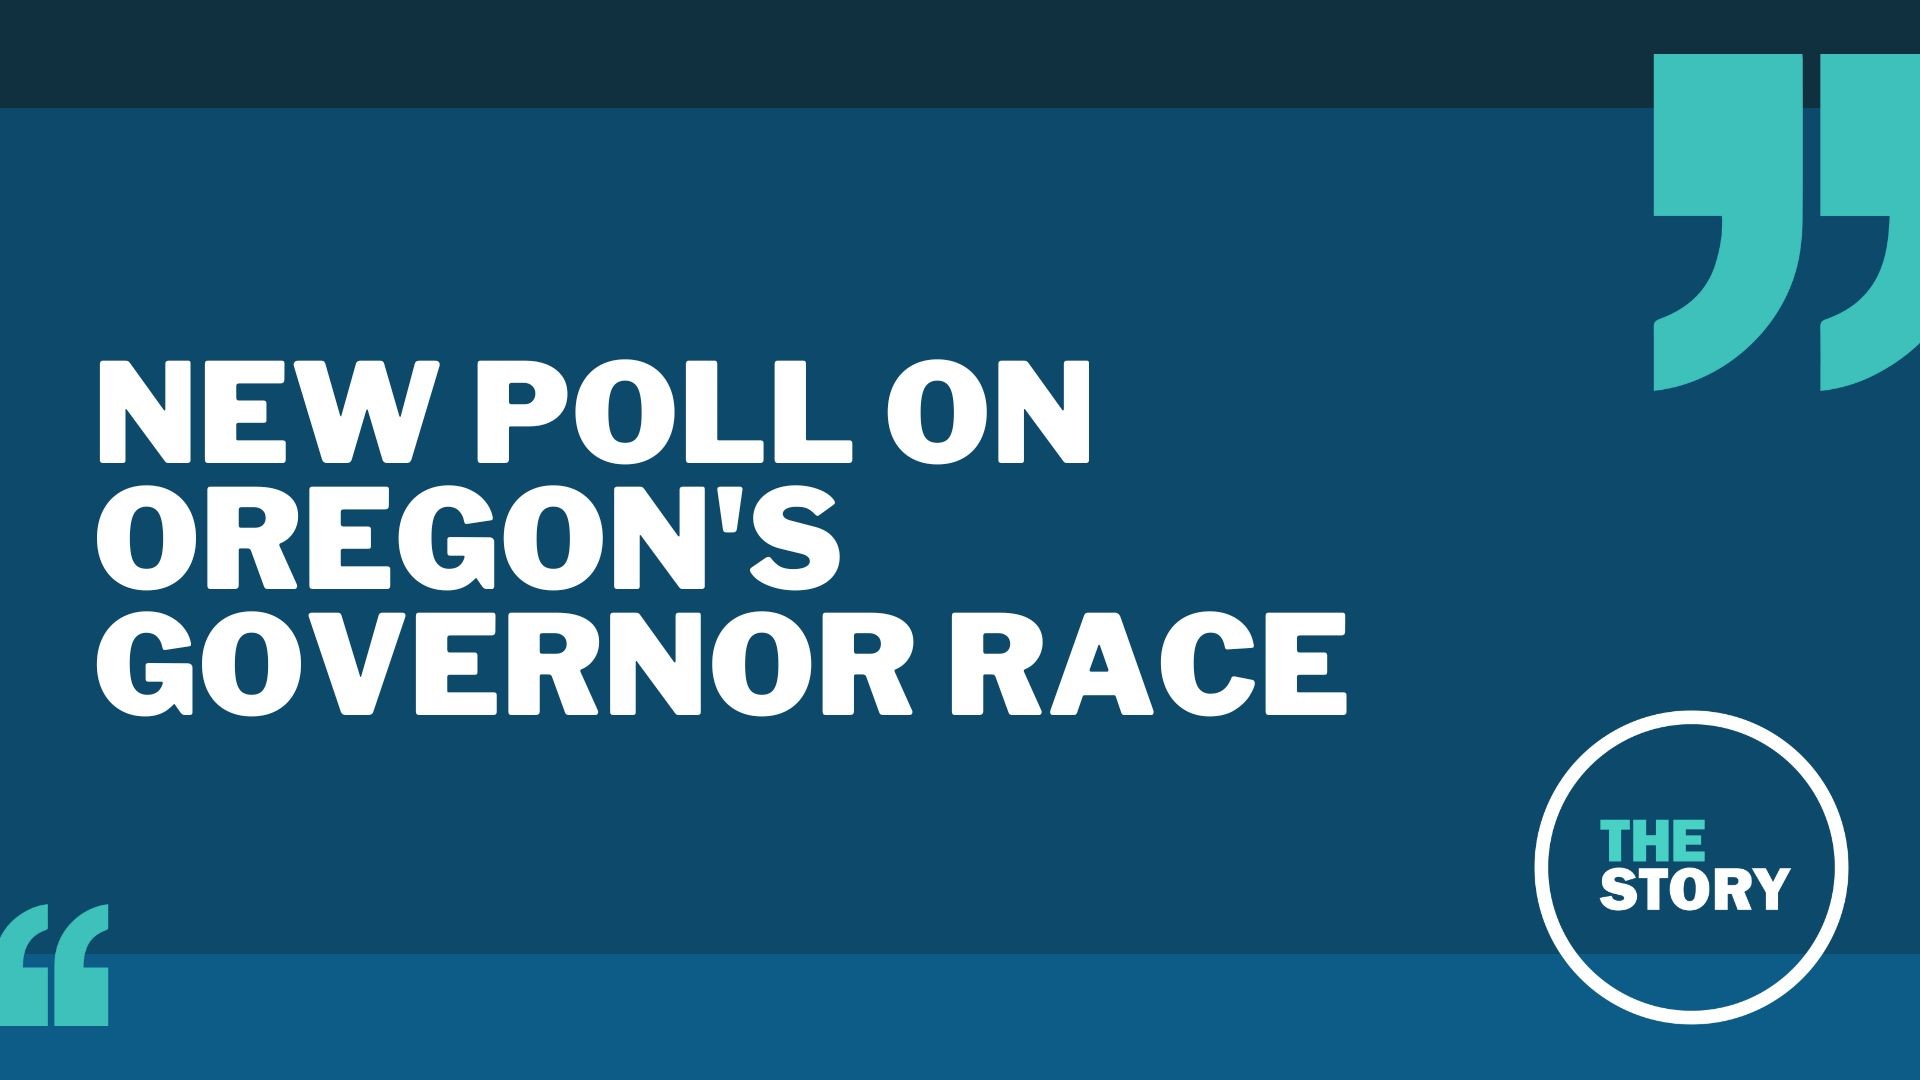 This past weekend "Clout Research" conducted a poll that surveyed 842 likely Oregon voters by phone. The margin of error in the poll is just over 3%.